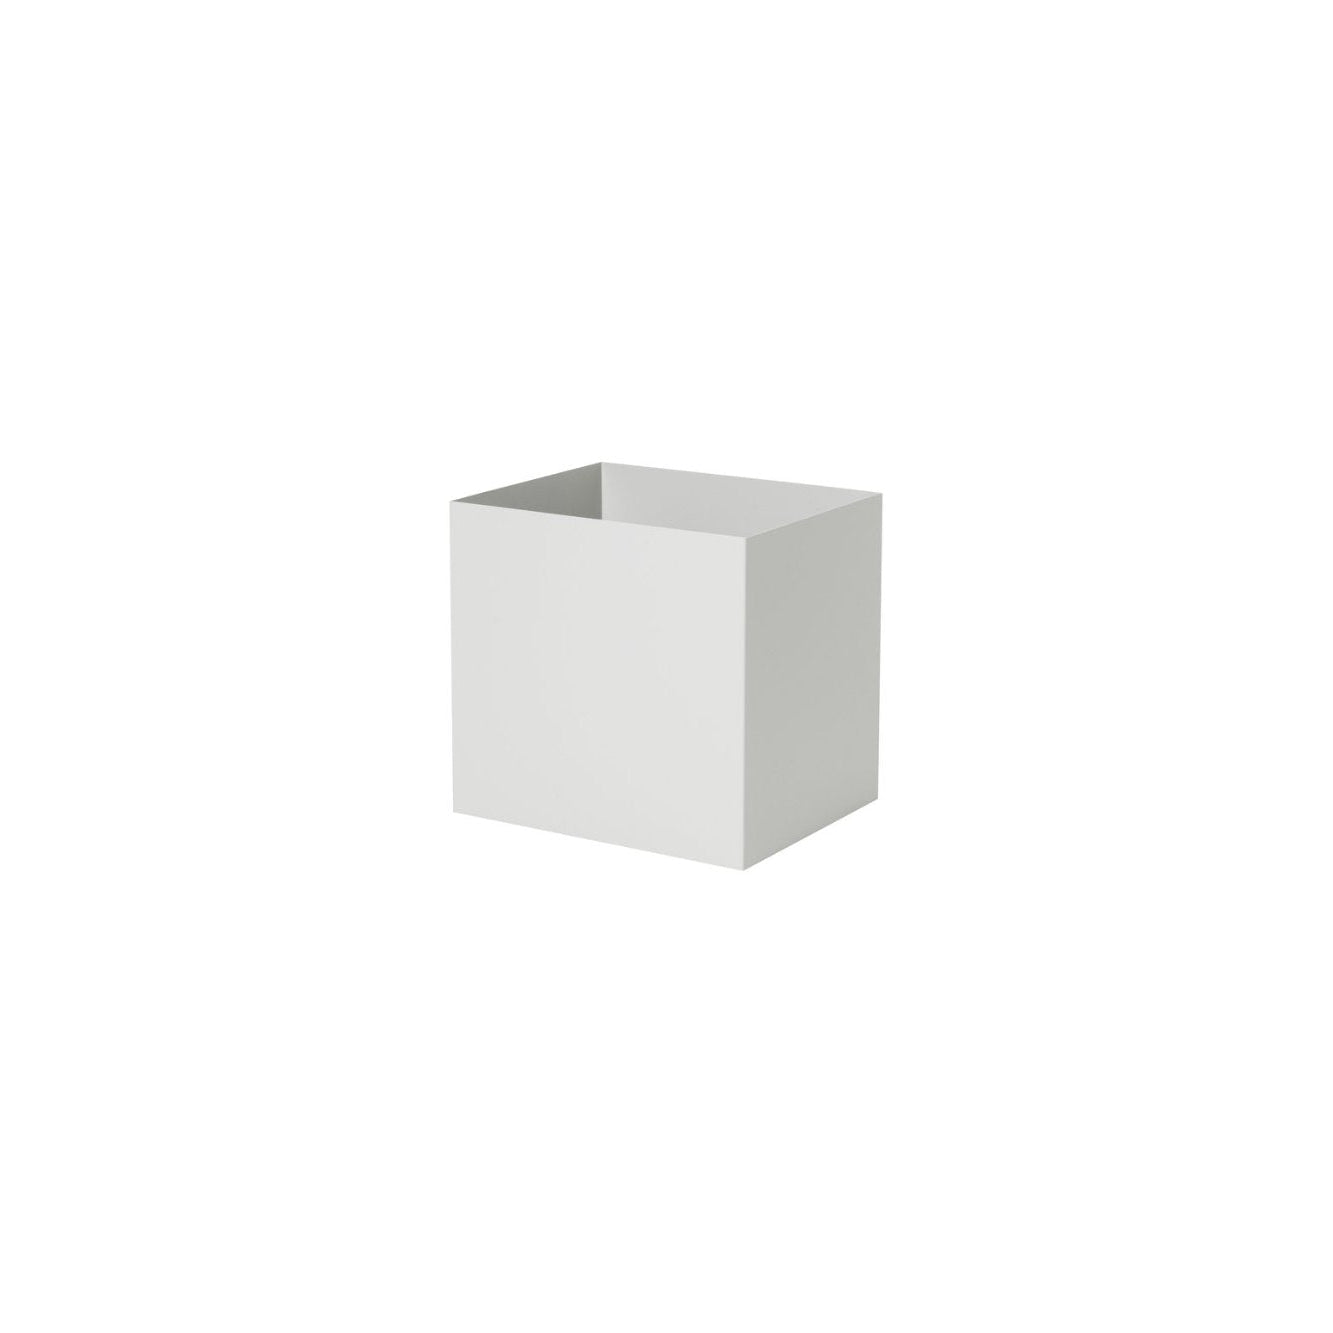 Ferm Living Plant Box Container, Grey